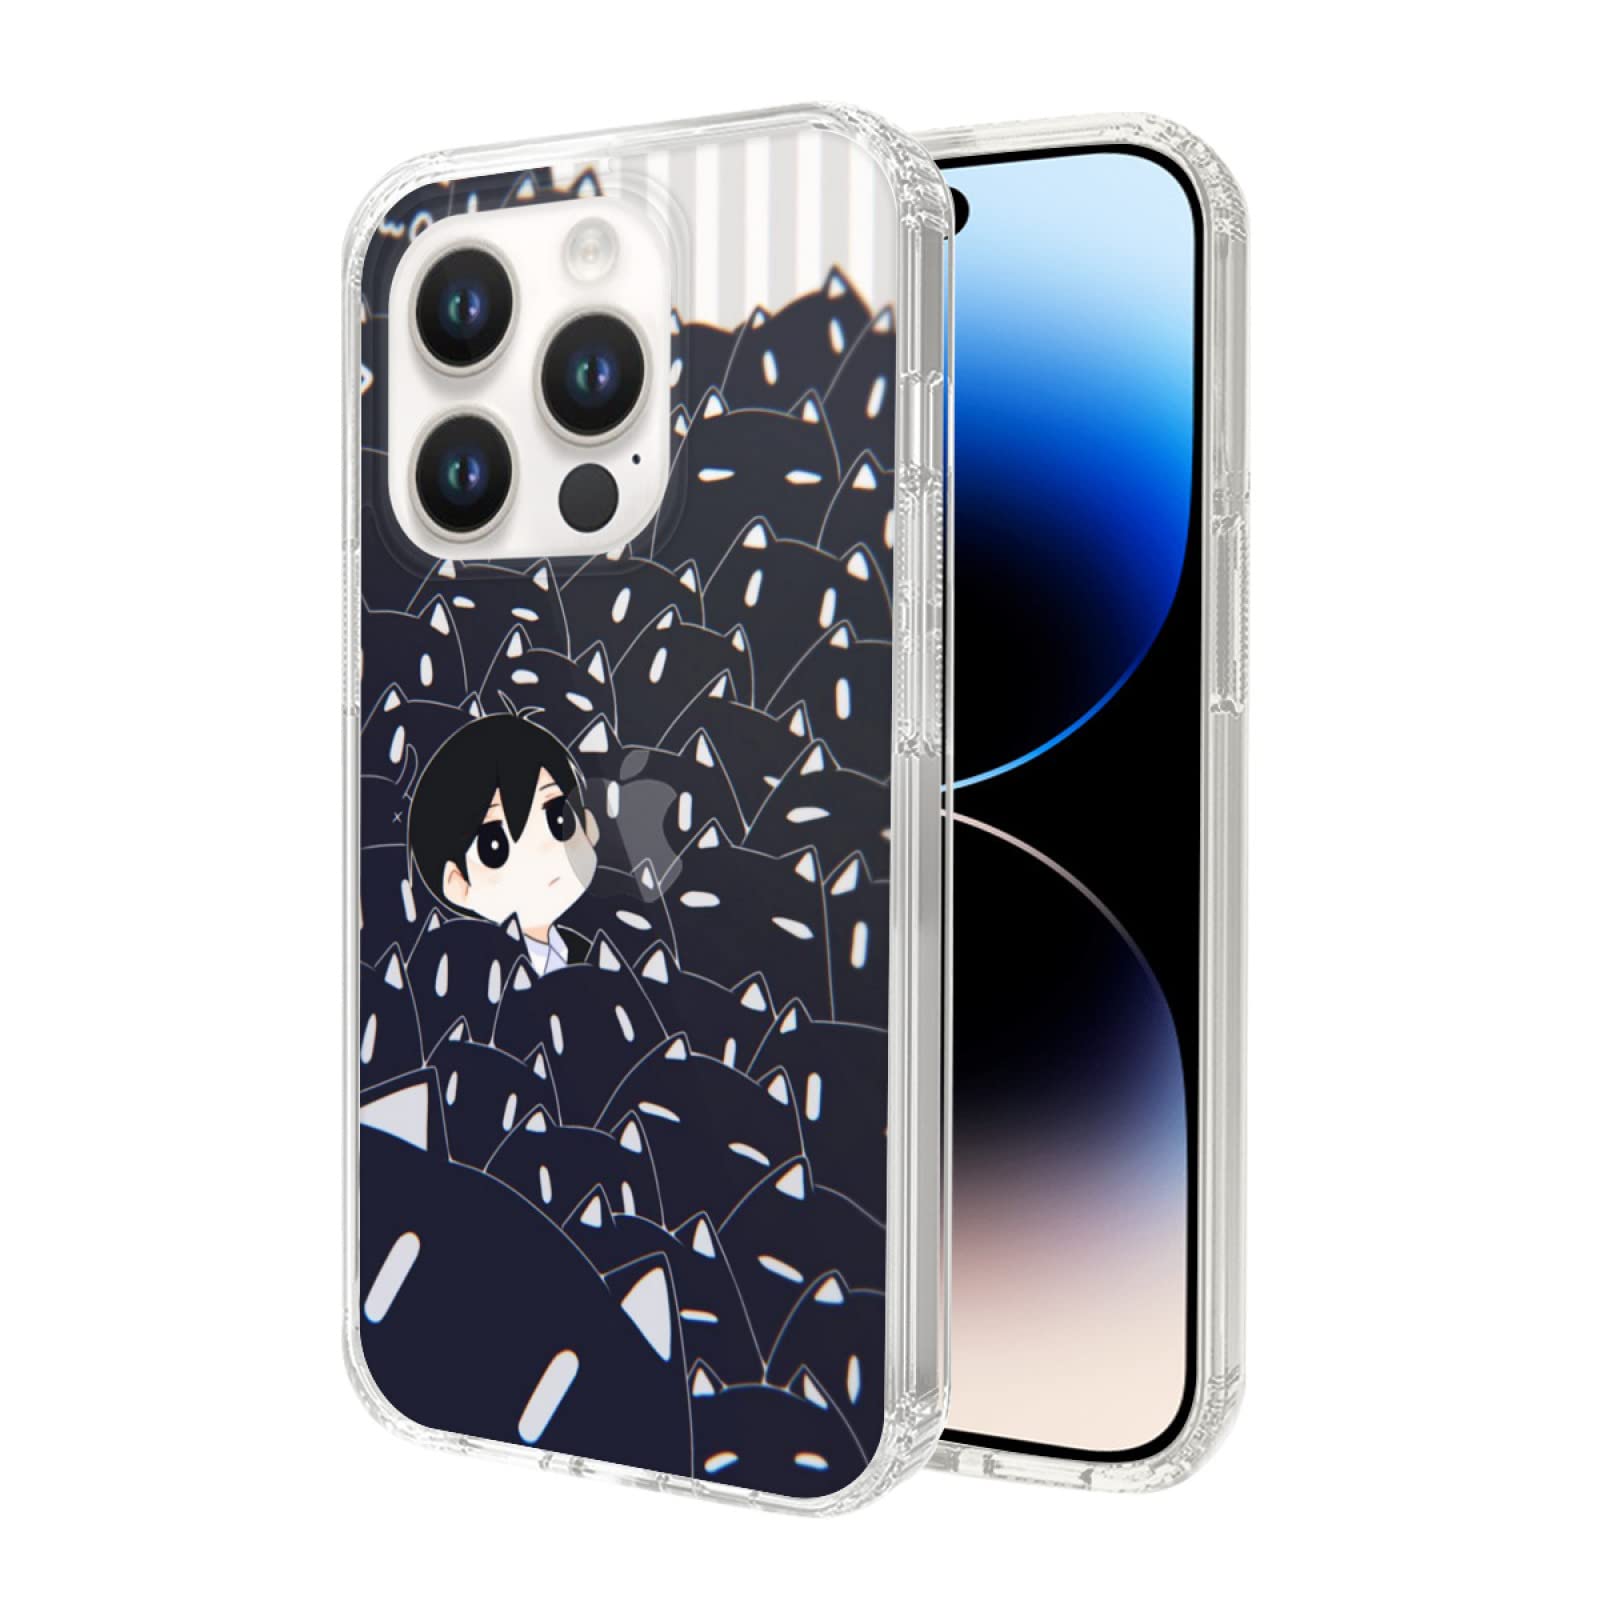 Wholesale Anime Cartoon Kamado Tanjiro Nezuko Voice Call Flash Glowing LED  Phone Case Cover For iPhone 13 12 11 Pro Max XR 6 7 8 Plus From  m.alibaba.com